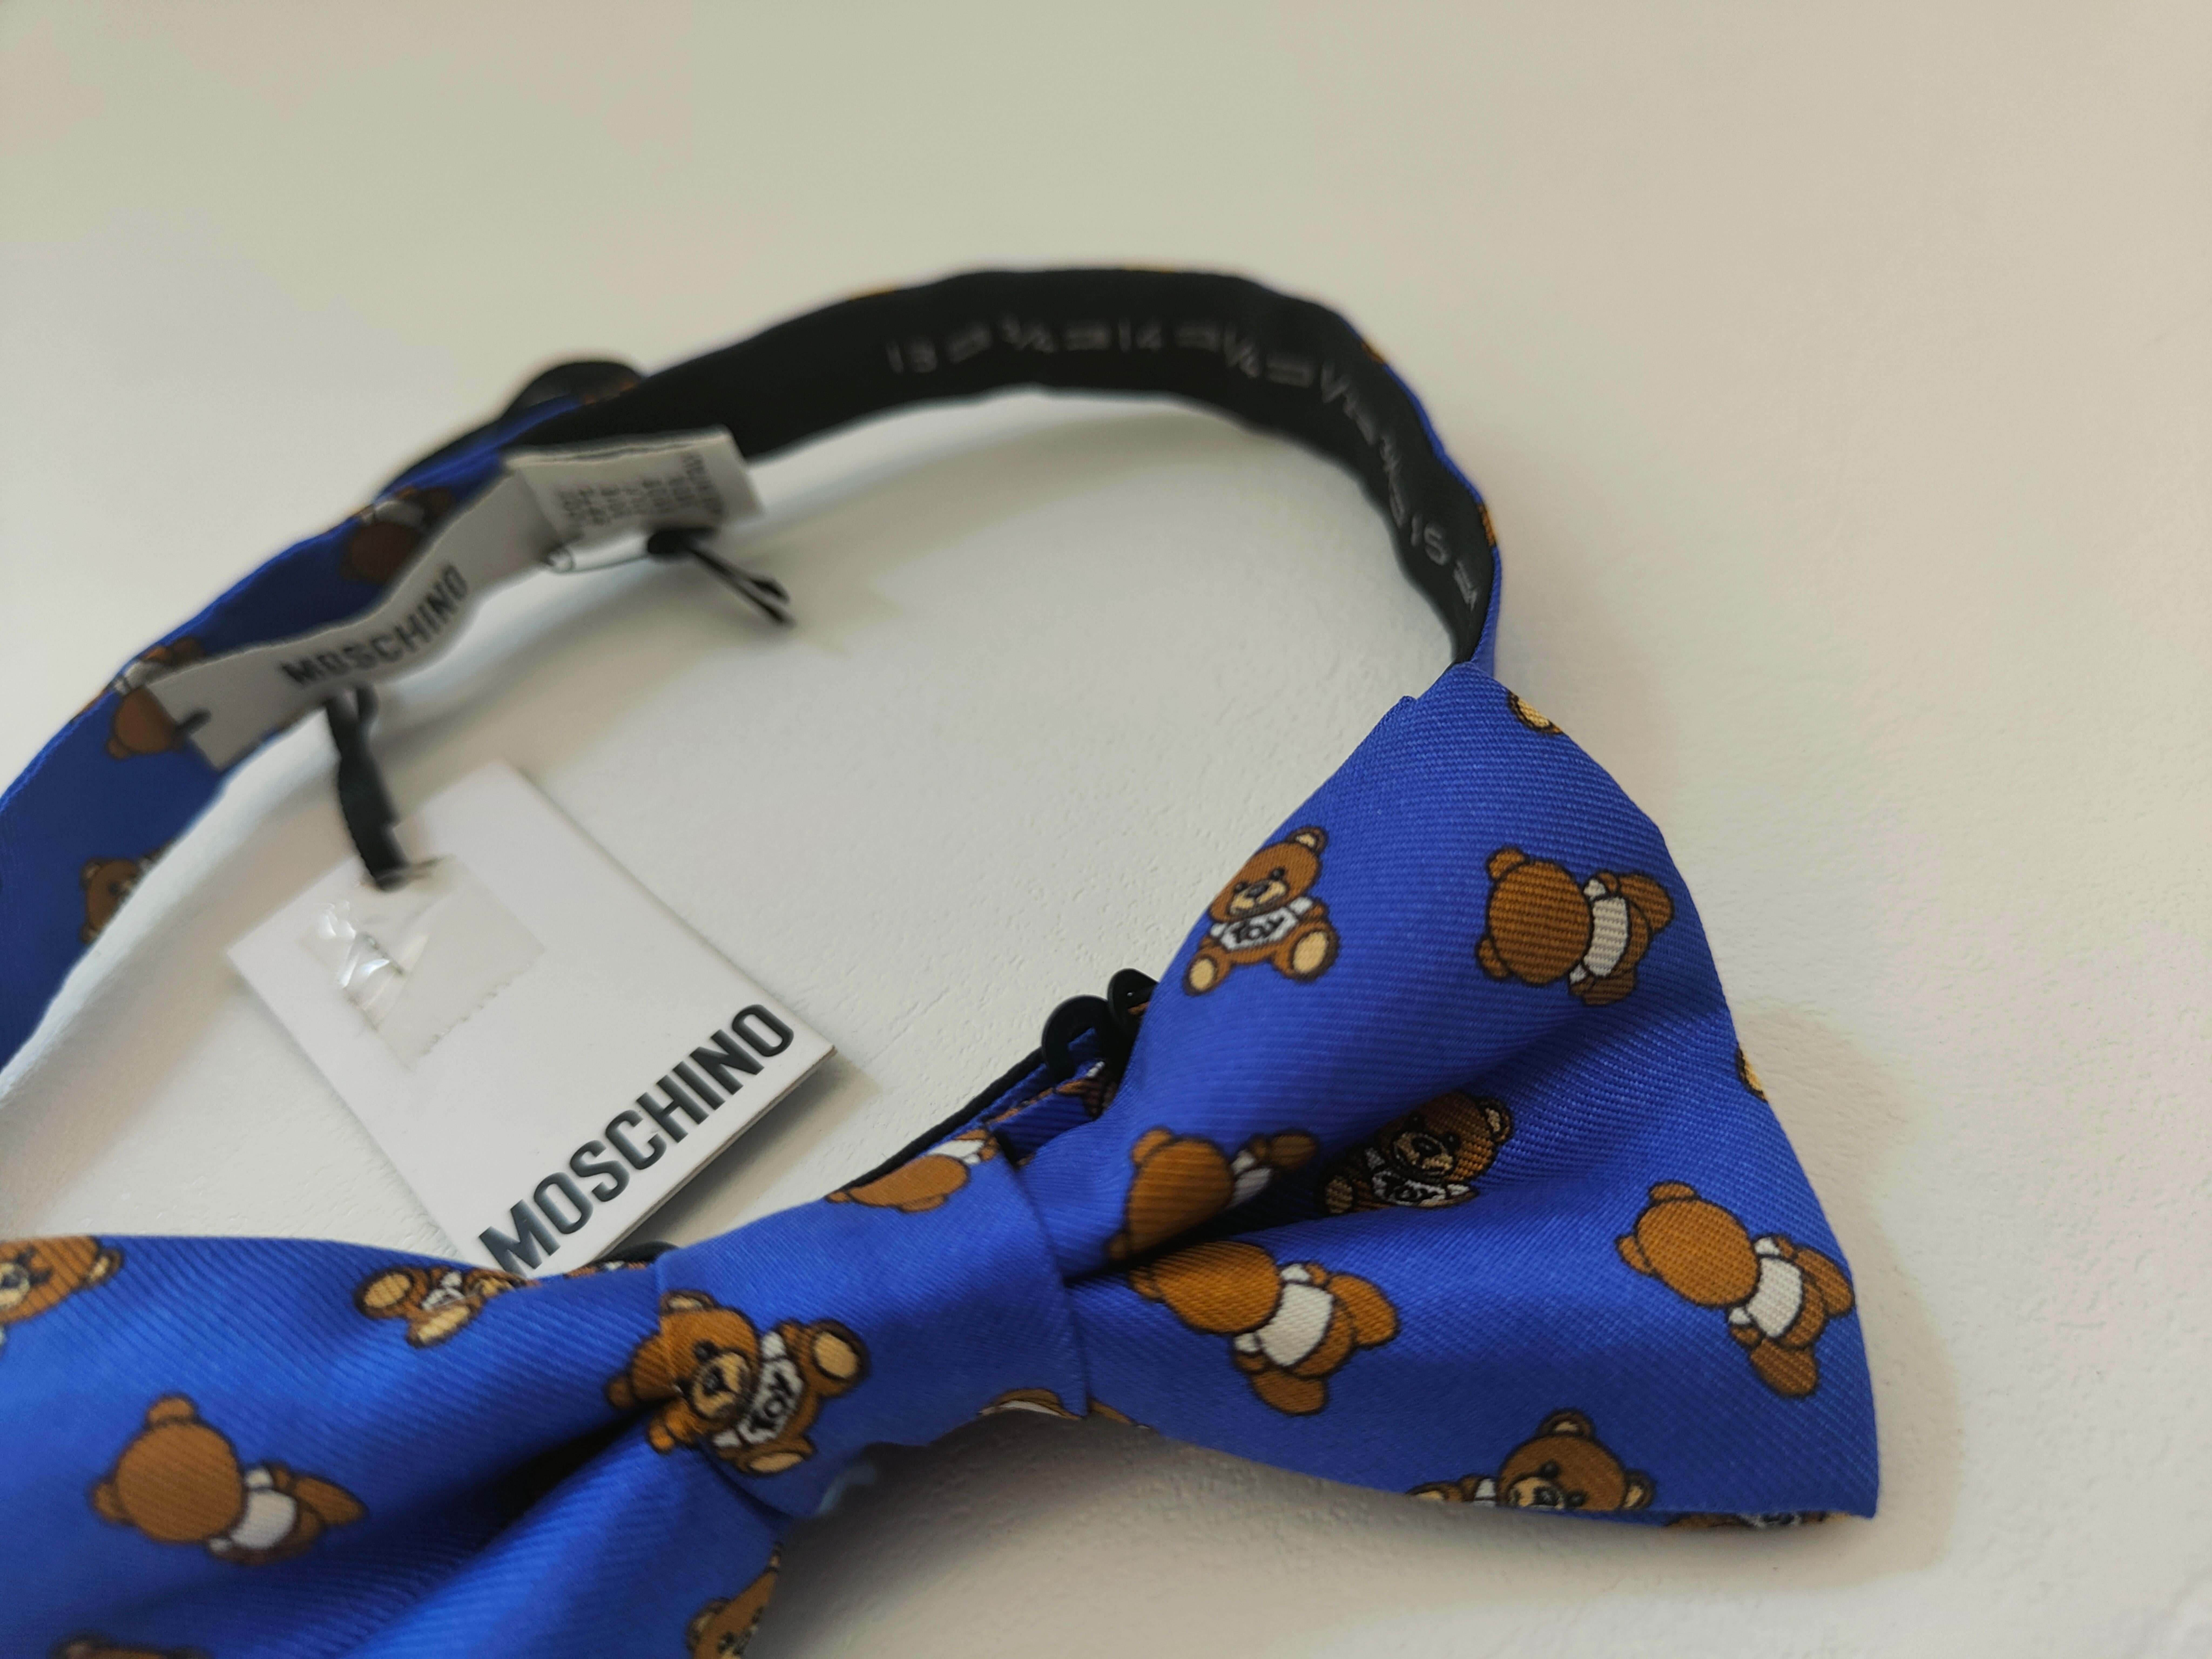 Moschino Blue multicoloured bow tie NWOT
100% silk